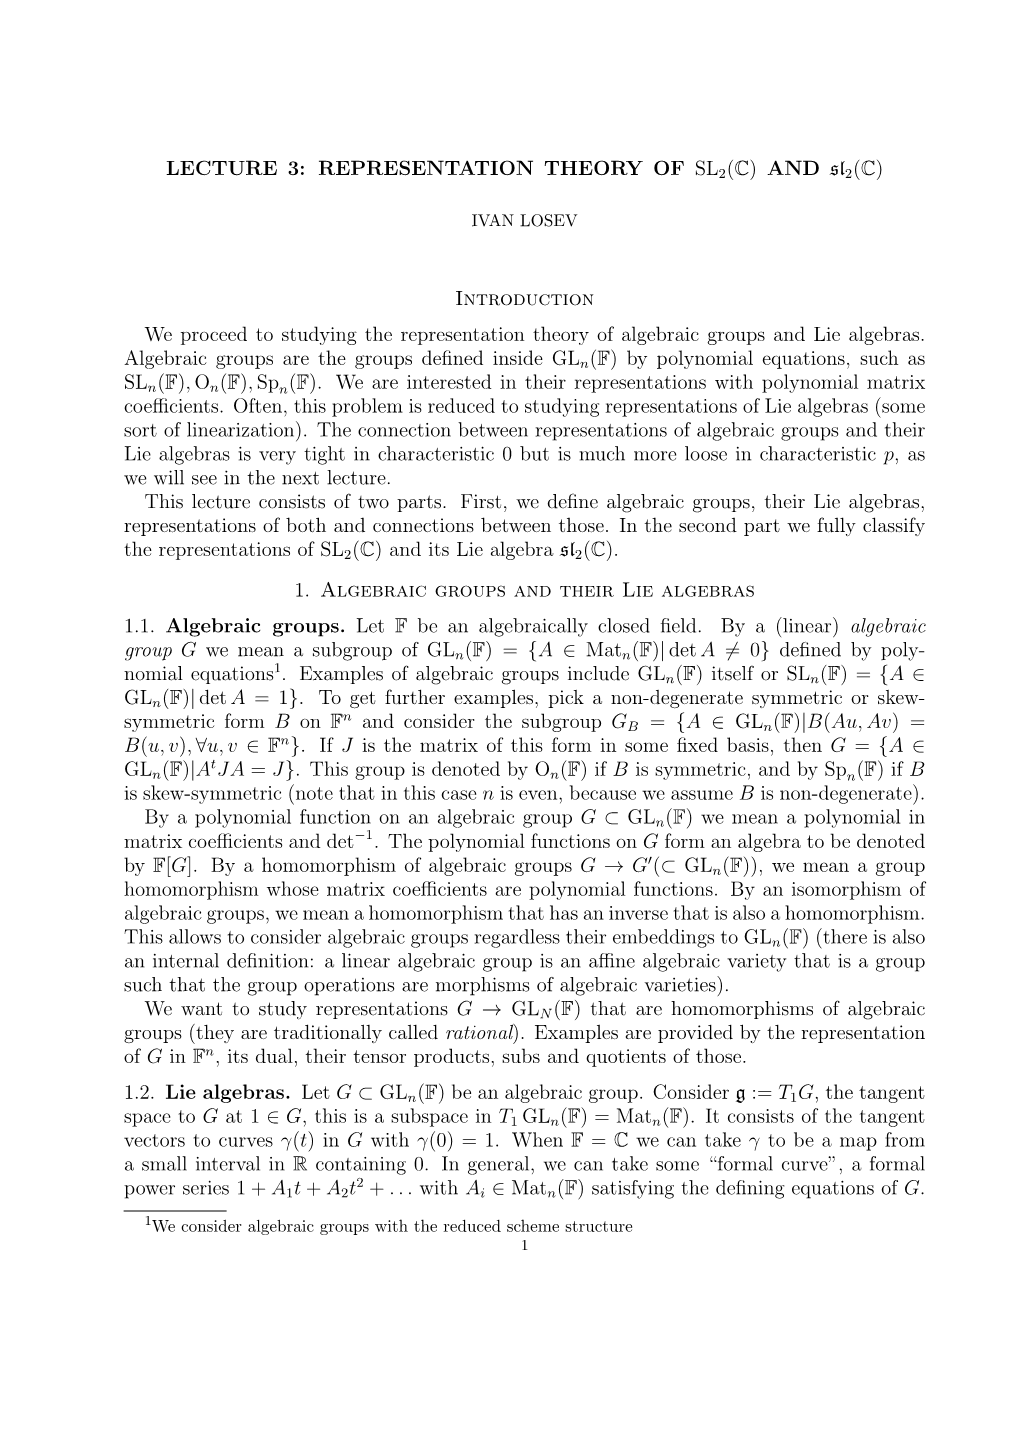 LECTURE 3: REPRESENTATION THEORY of SL2(C) and Sl2(C)